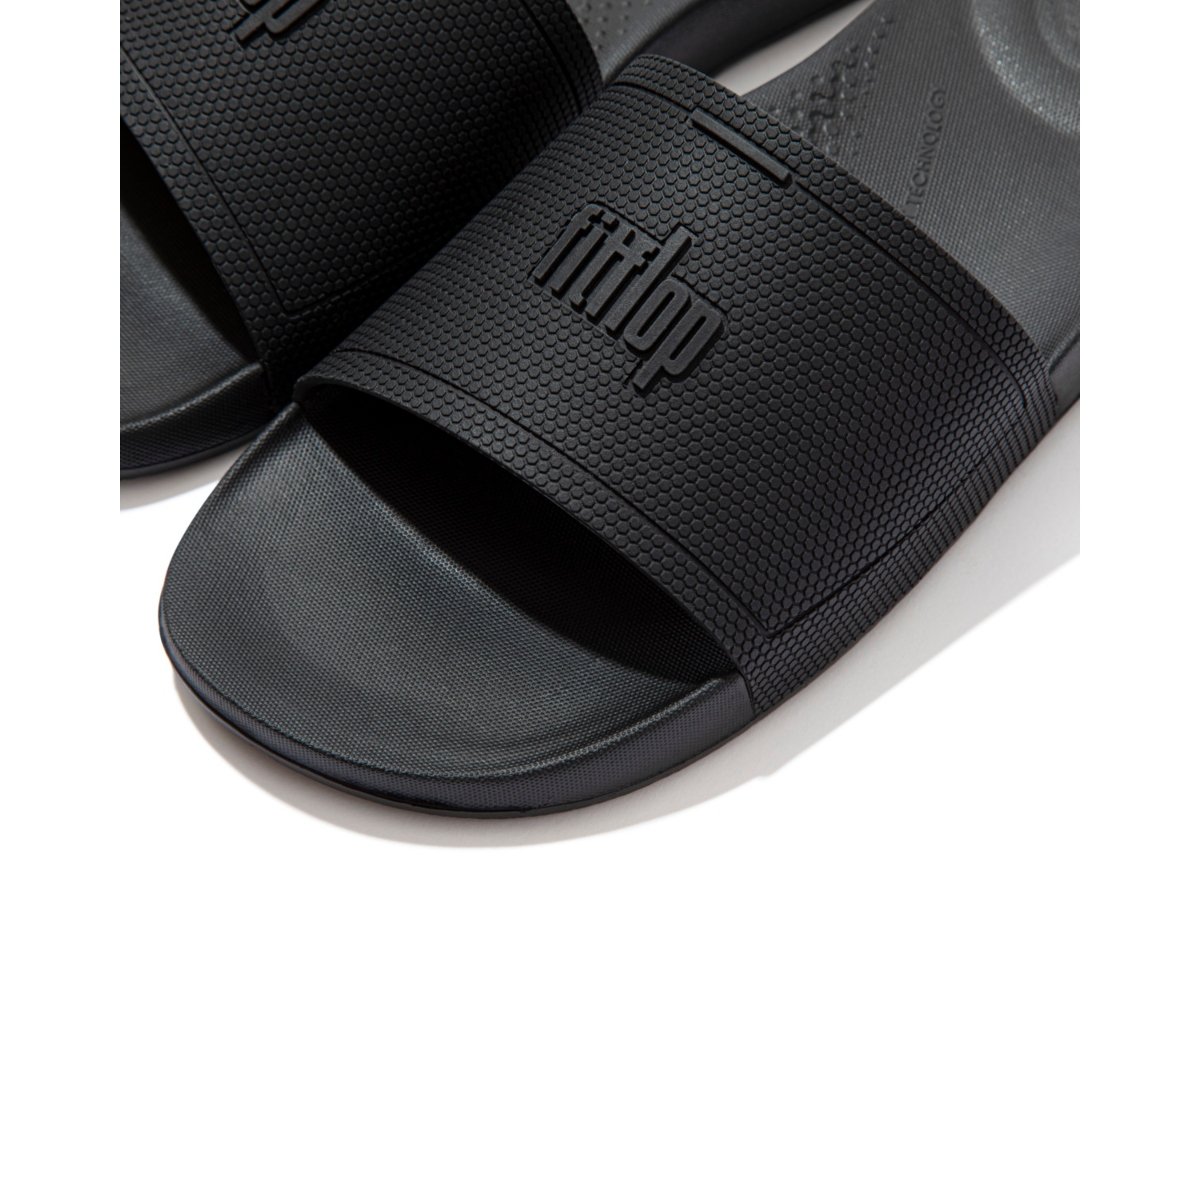 FitFlop iQUSHION Pool Sliders All Black close up